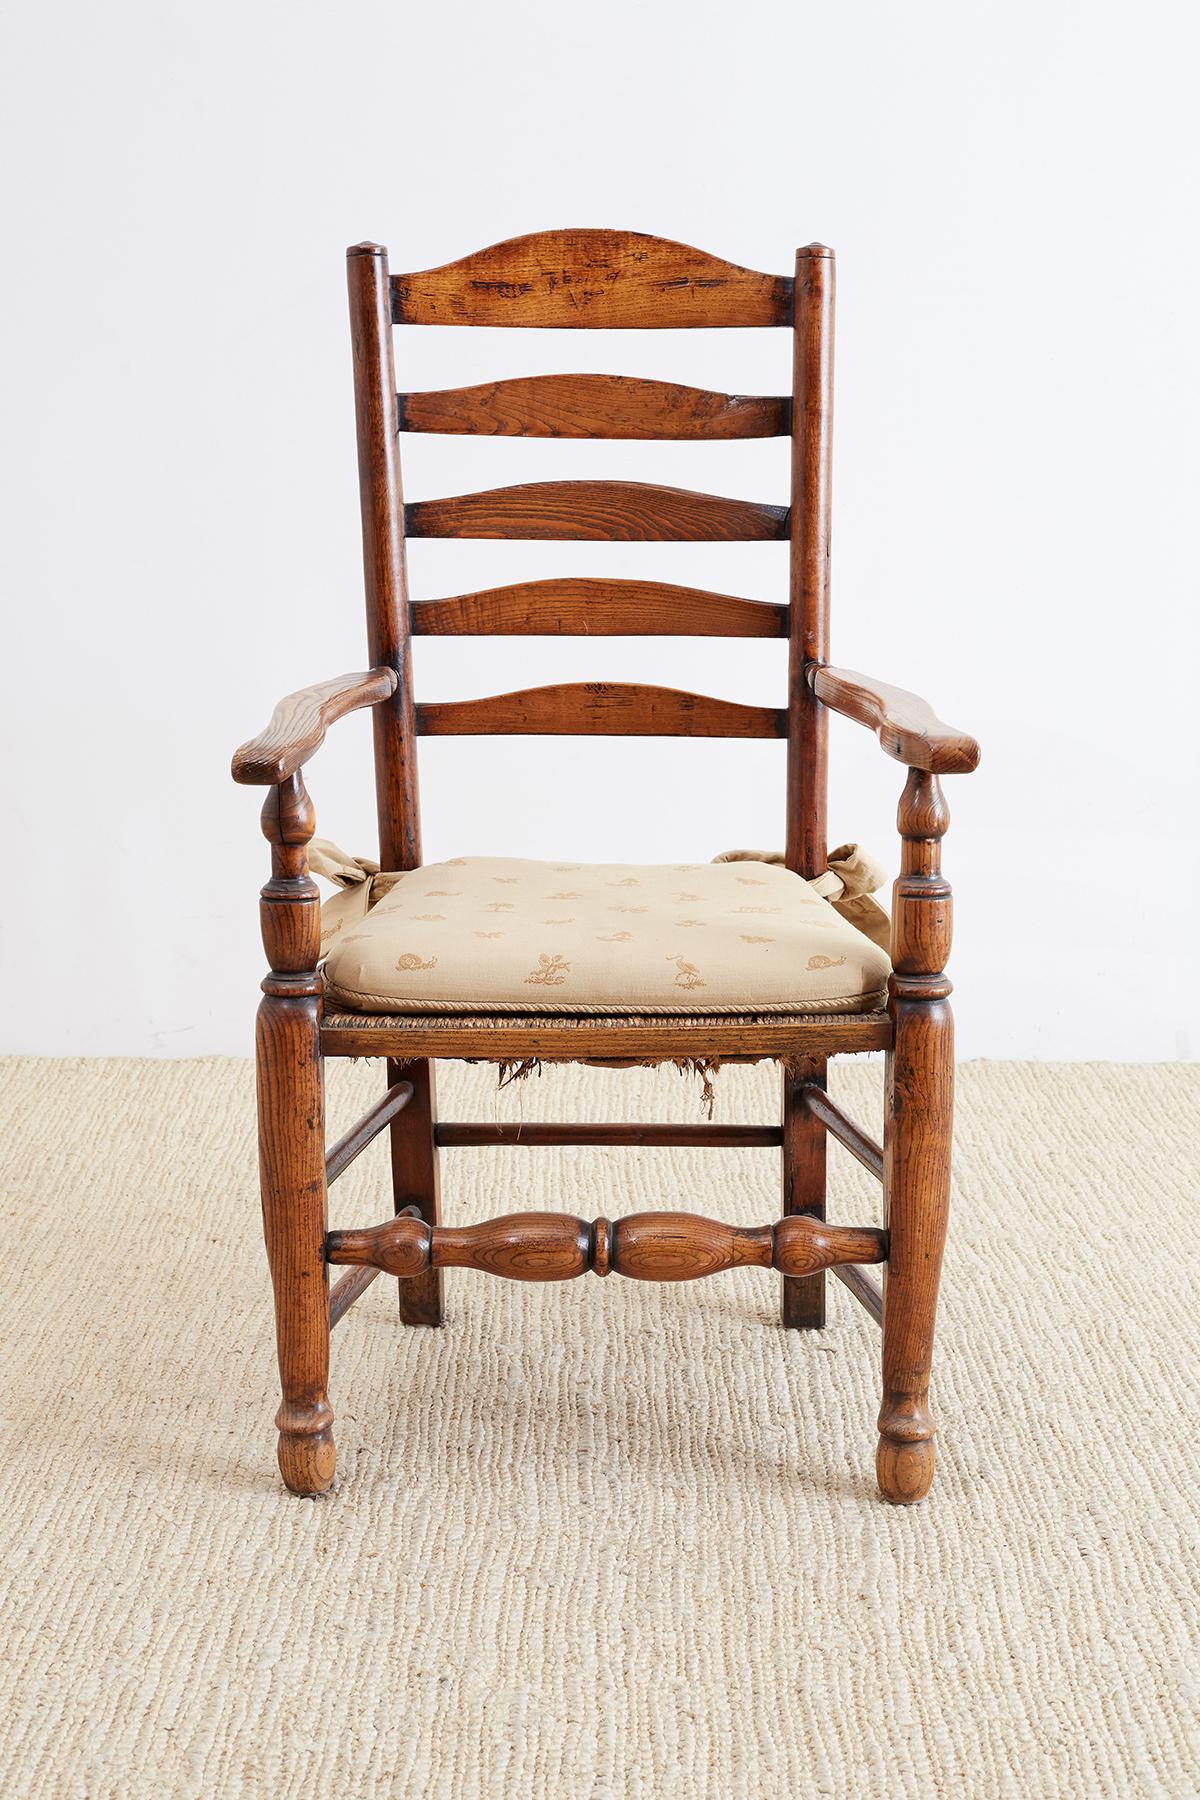 Large 19th century English carved oak armchair featuring a ladder back design and a rush seat. Sits on massive turned legs with box stretching. Wide elbow chair arms and a warm, rich patina on the vintage wood. From the Pebble Beach, California